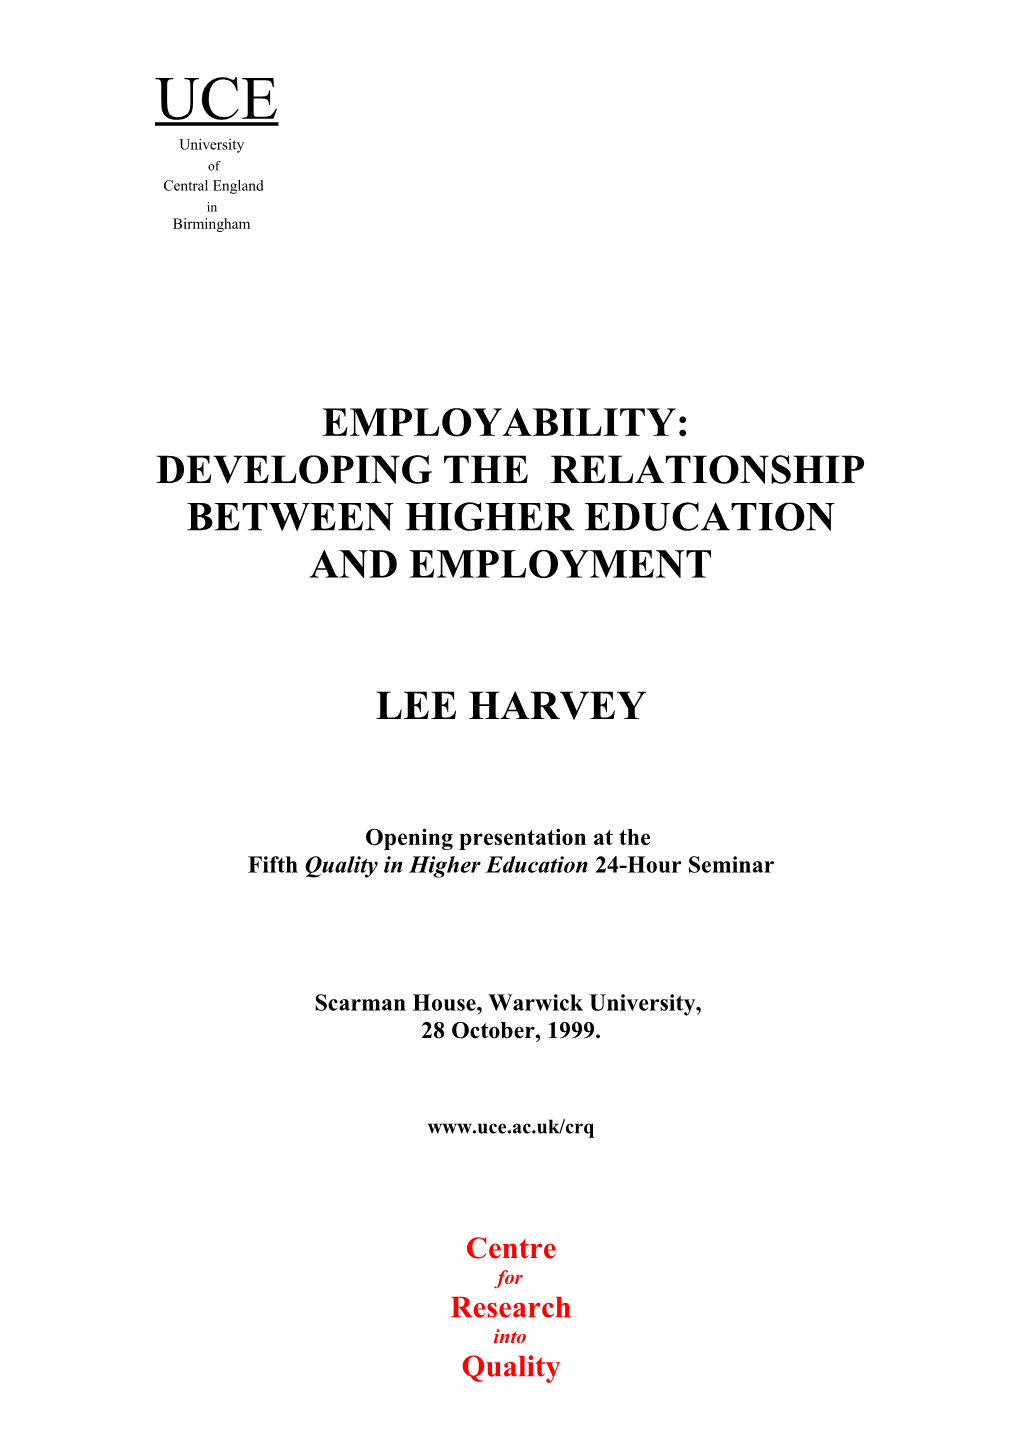 DEVELOPING the Relationship Between Higher Education and Employment